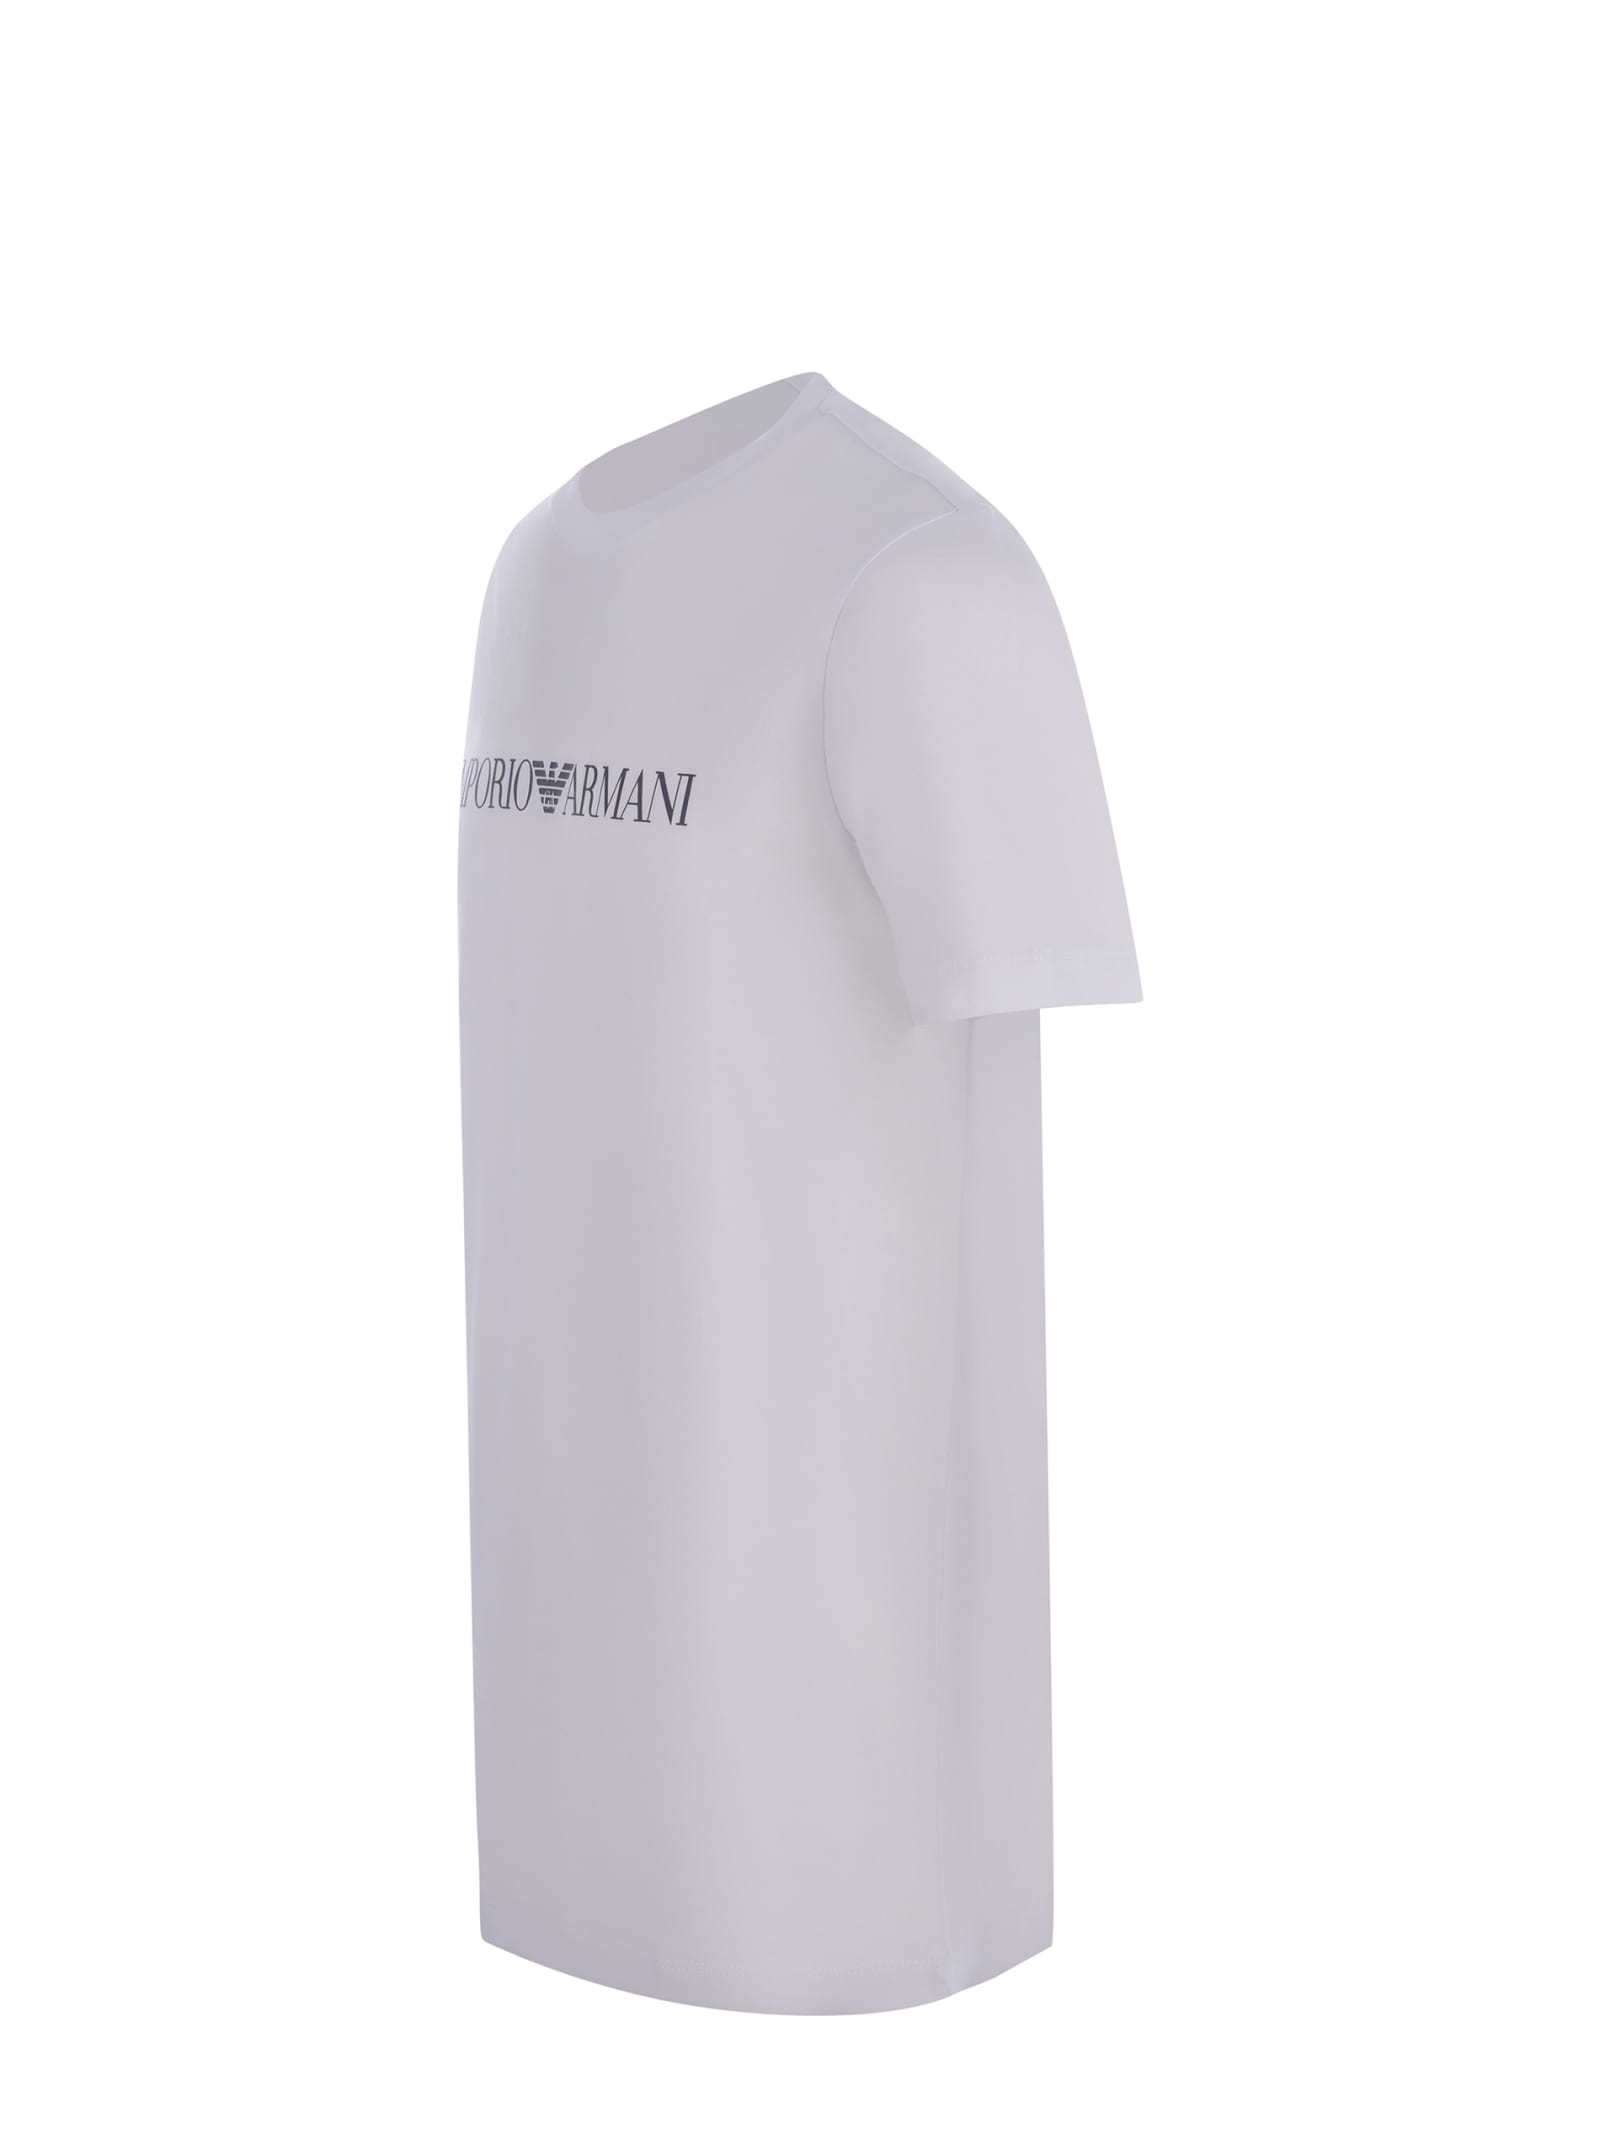 Shop Emporio Armani T-shirt  Made Of Cotton In Bianco